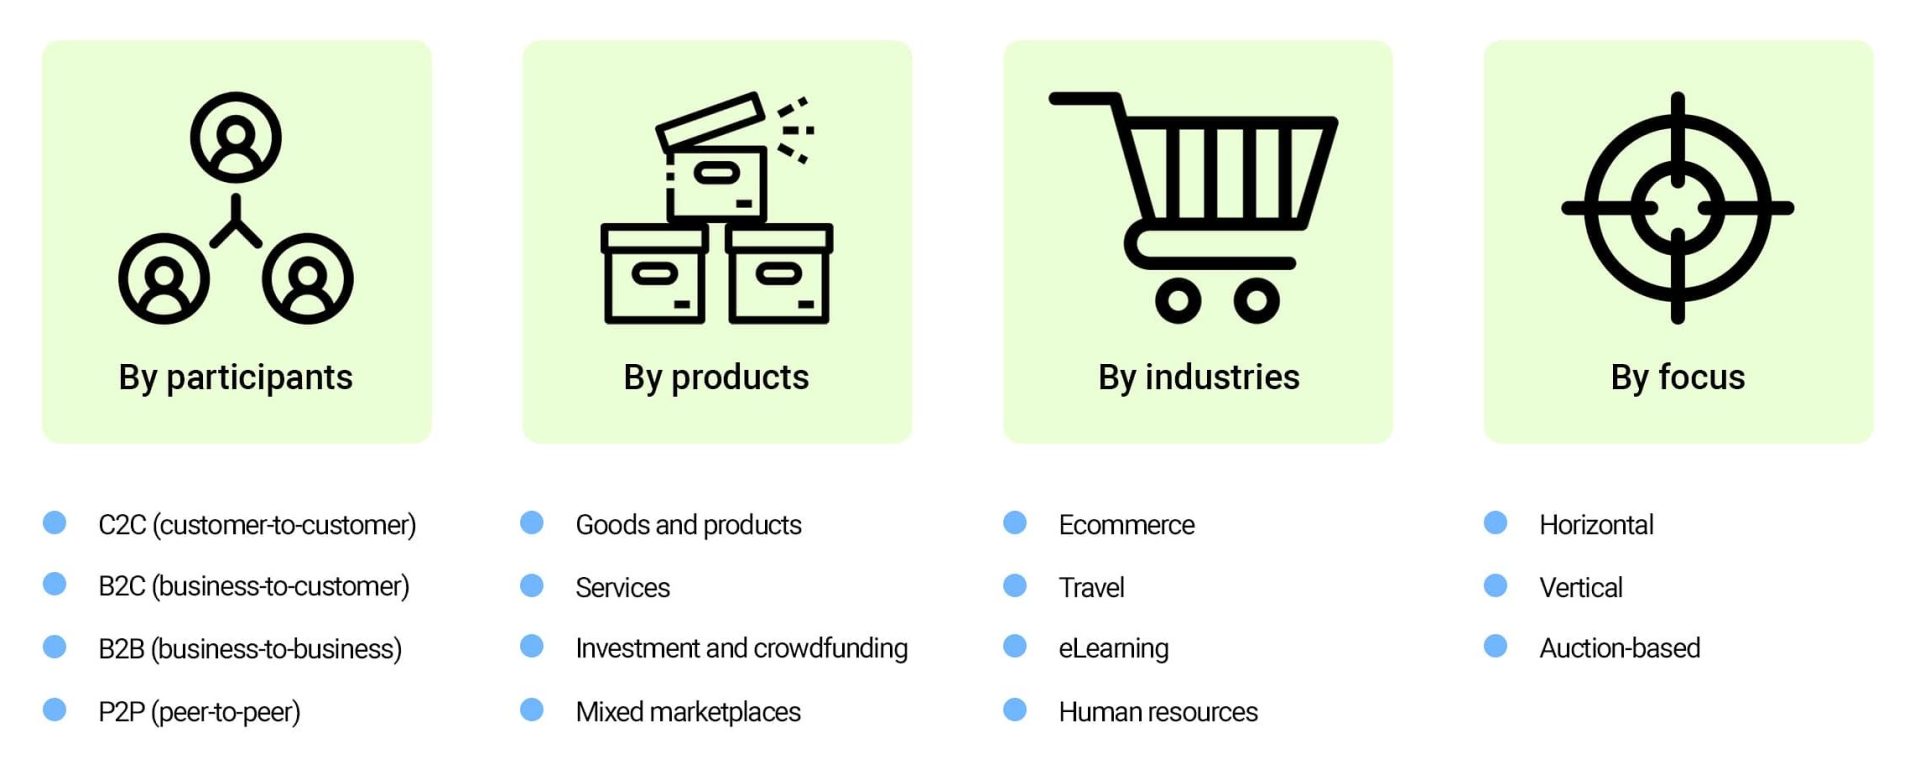 Main types of marketplaces